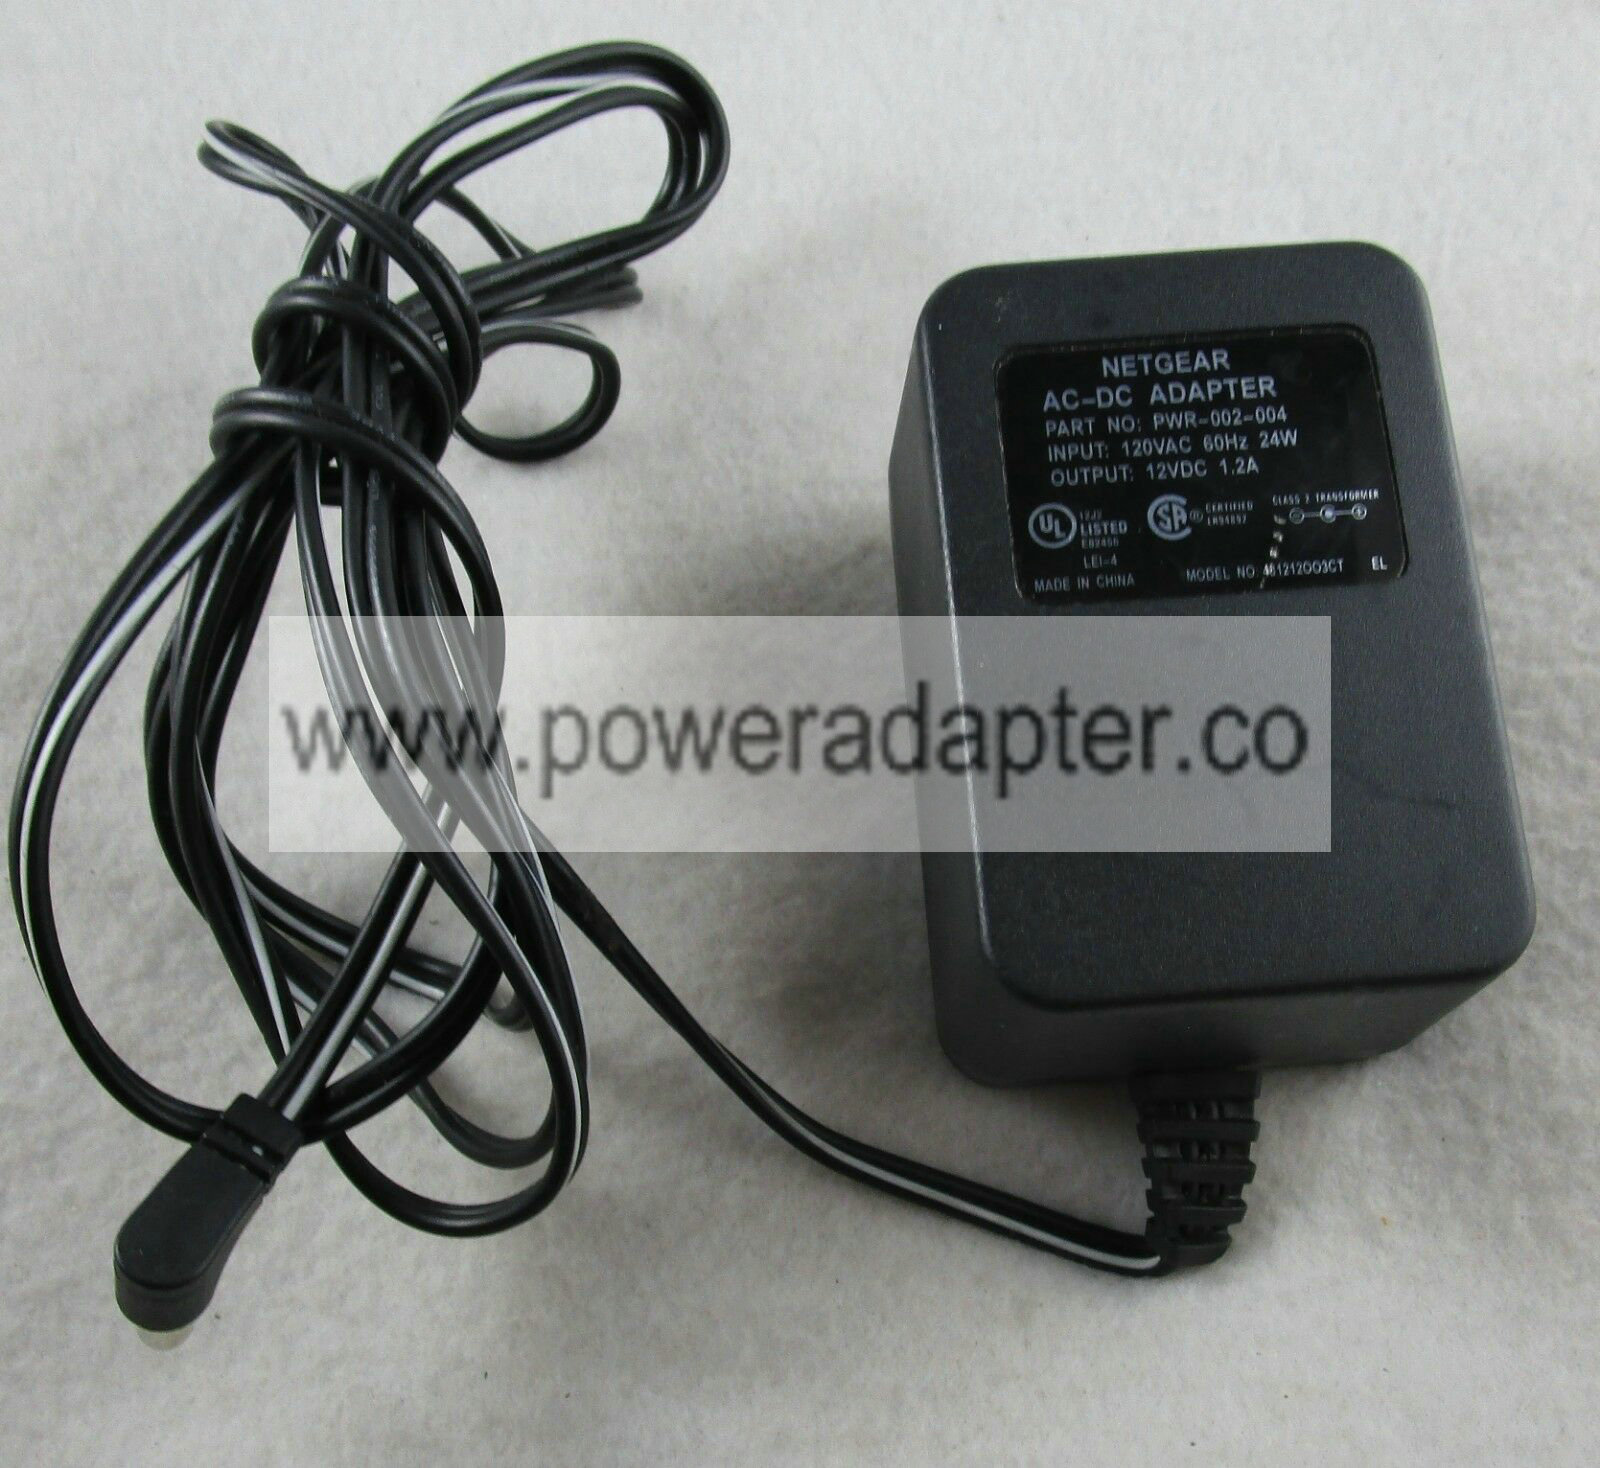 NetGear EN108 FS105 FE104 SW108 DS108 12V 1.2A AC Power Adapter PWR-002-004 Bundled Items: Power Cable MPN: PWR-00 - Click Image to Close